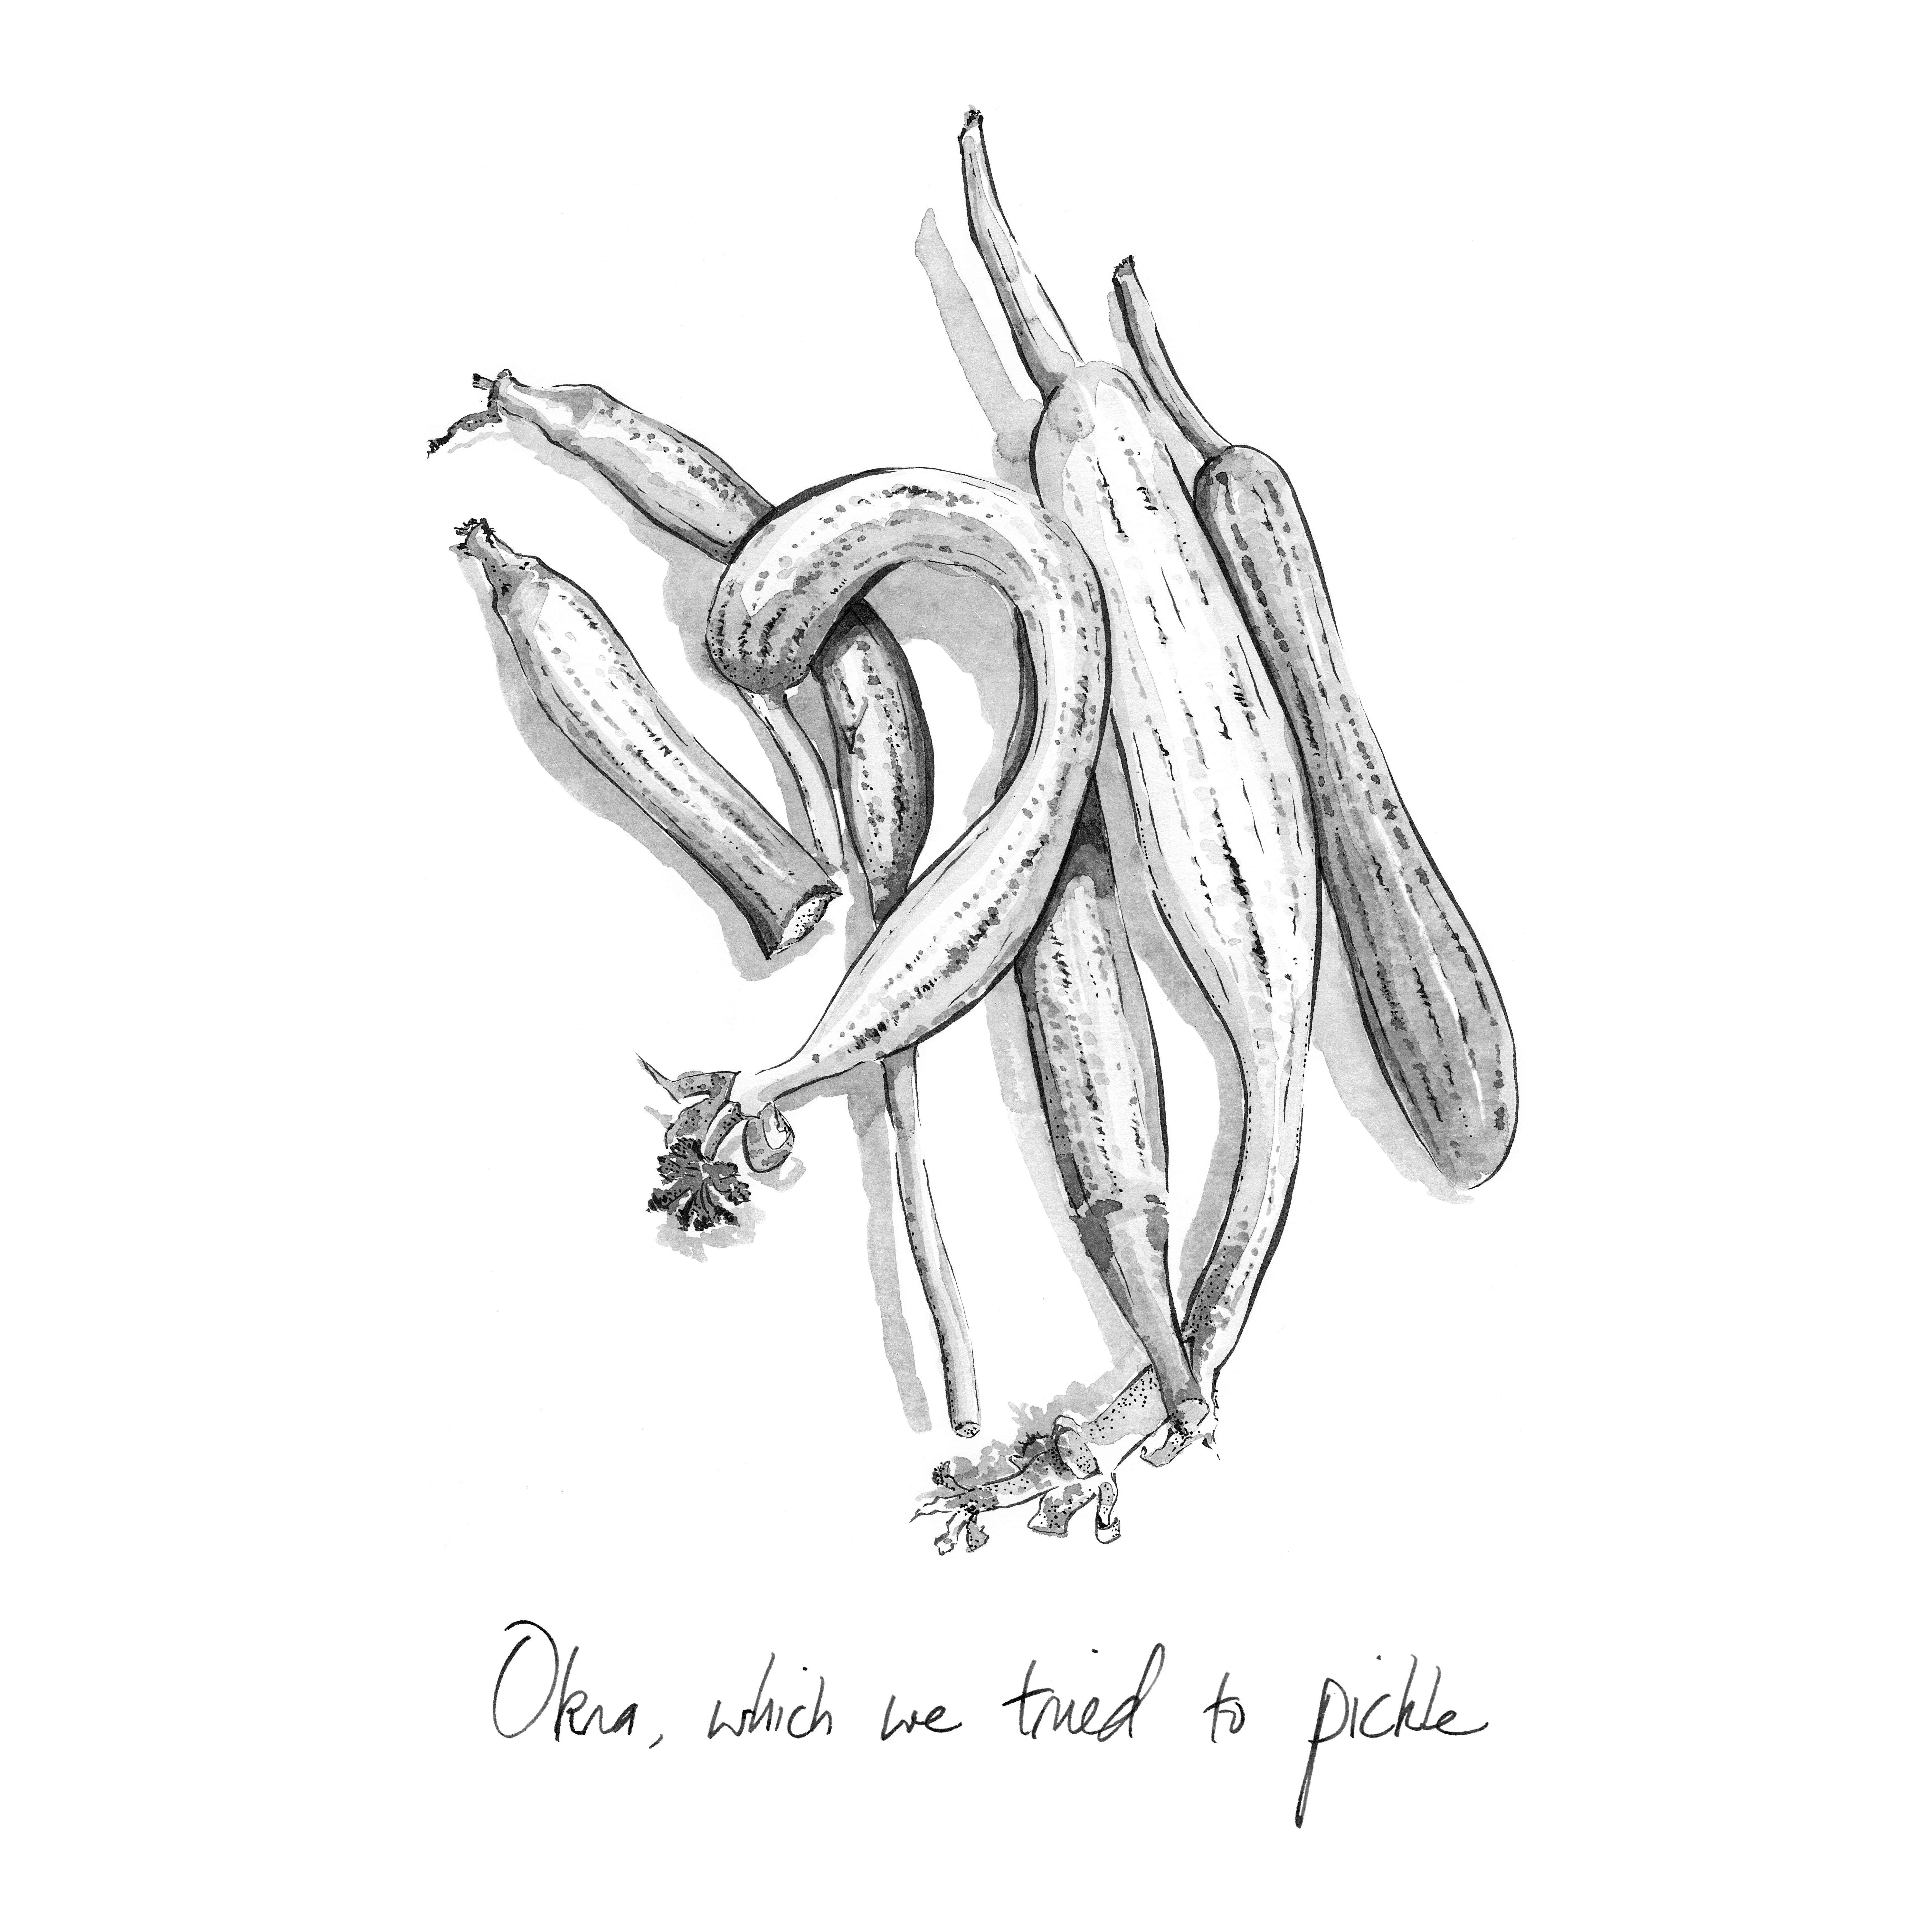 An ink drawing of okra, laying in a pile on a white ground. The caption reads "Okra, which we tried to pickle."